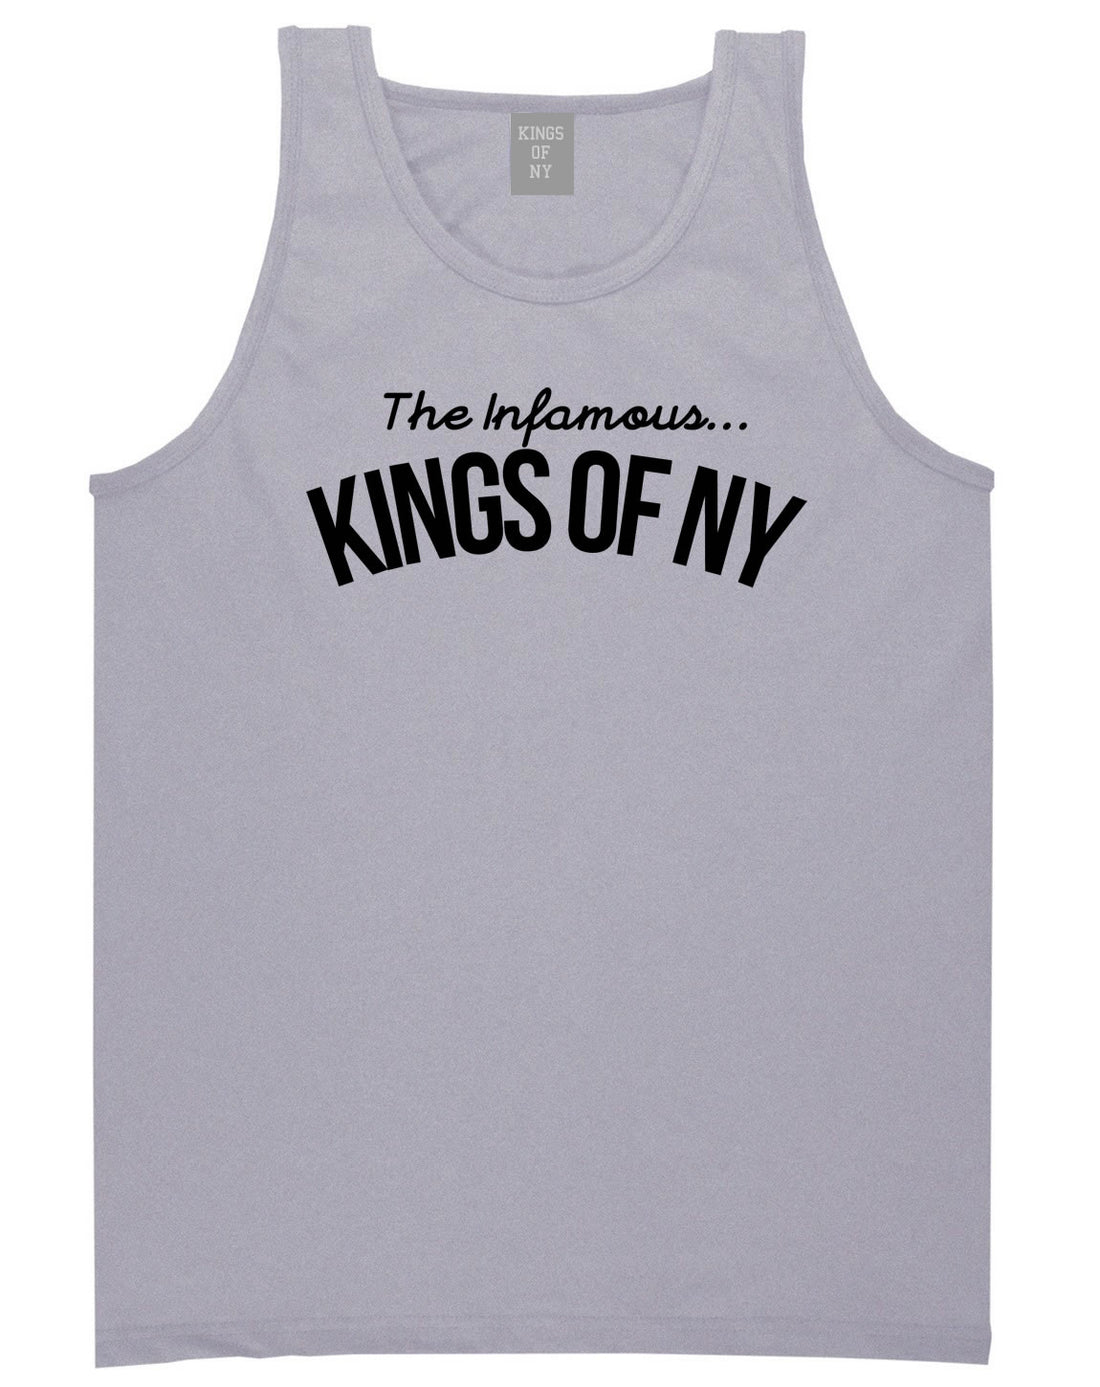 The Infamous Kings Of NY Tank Top in Grey By Kings Of NY